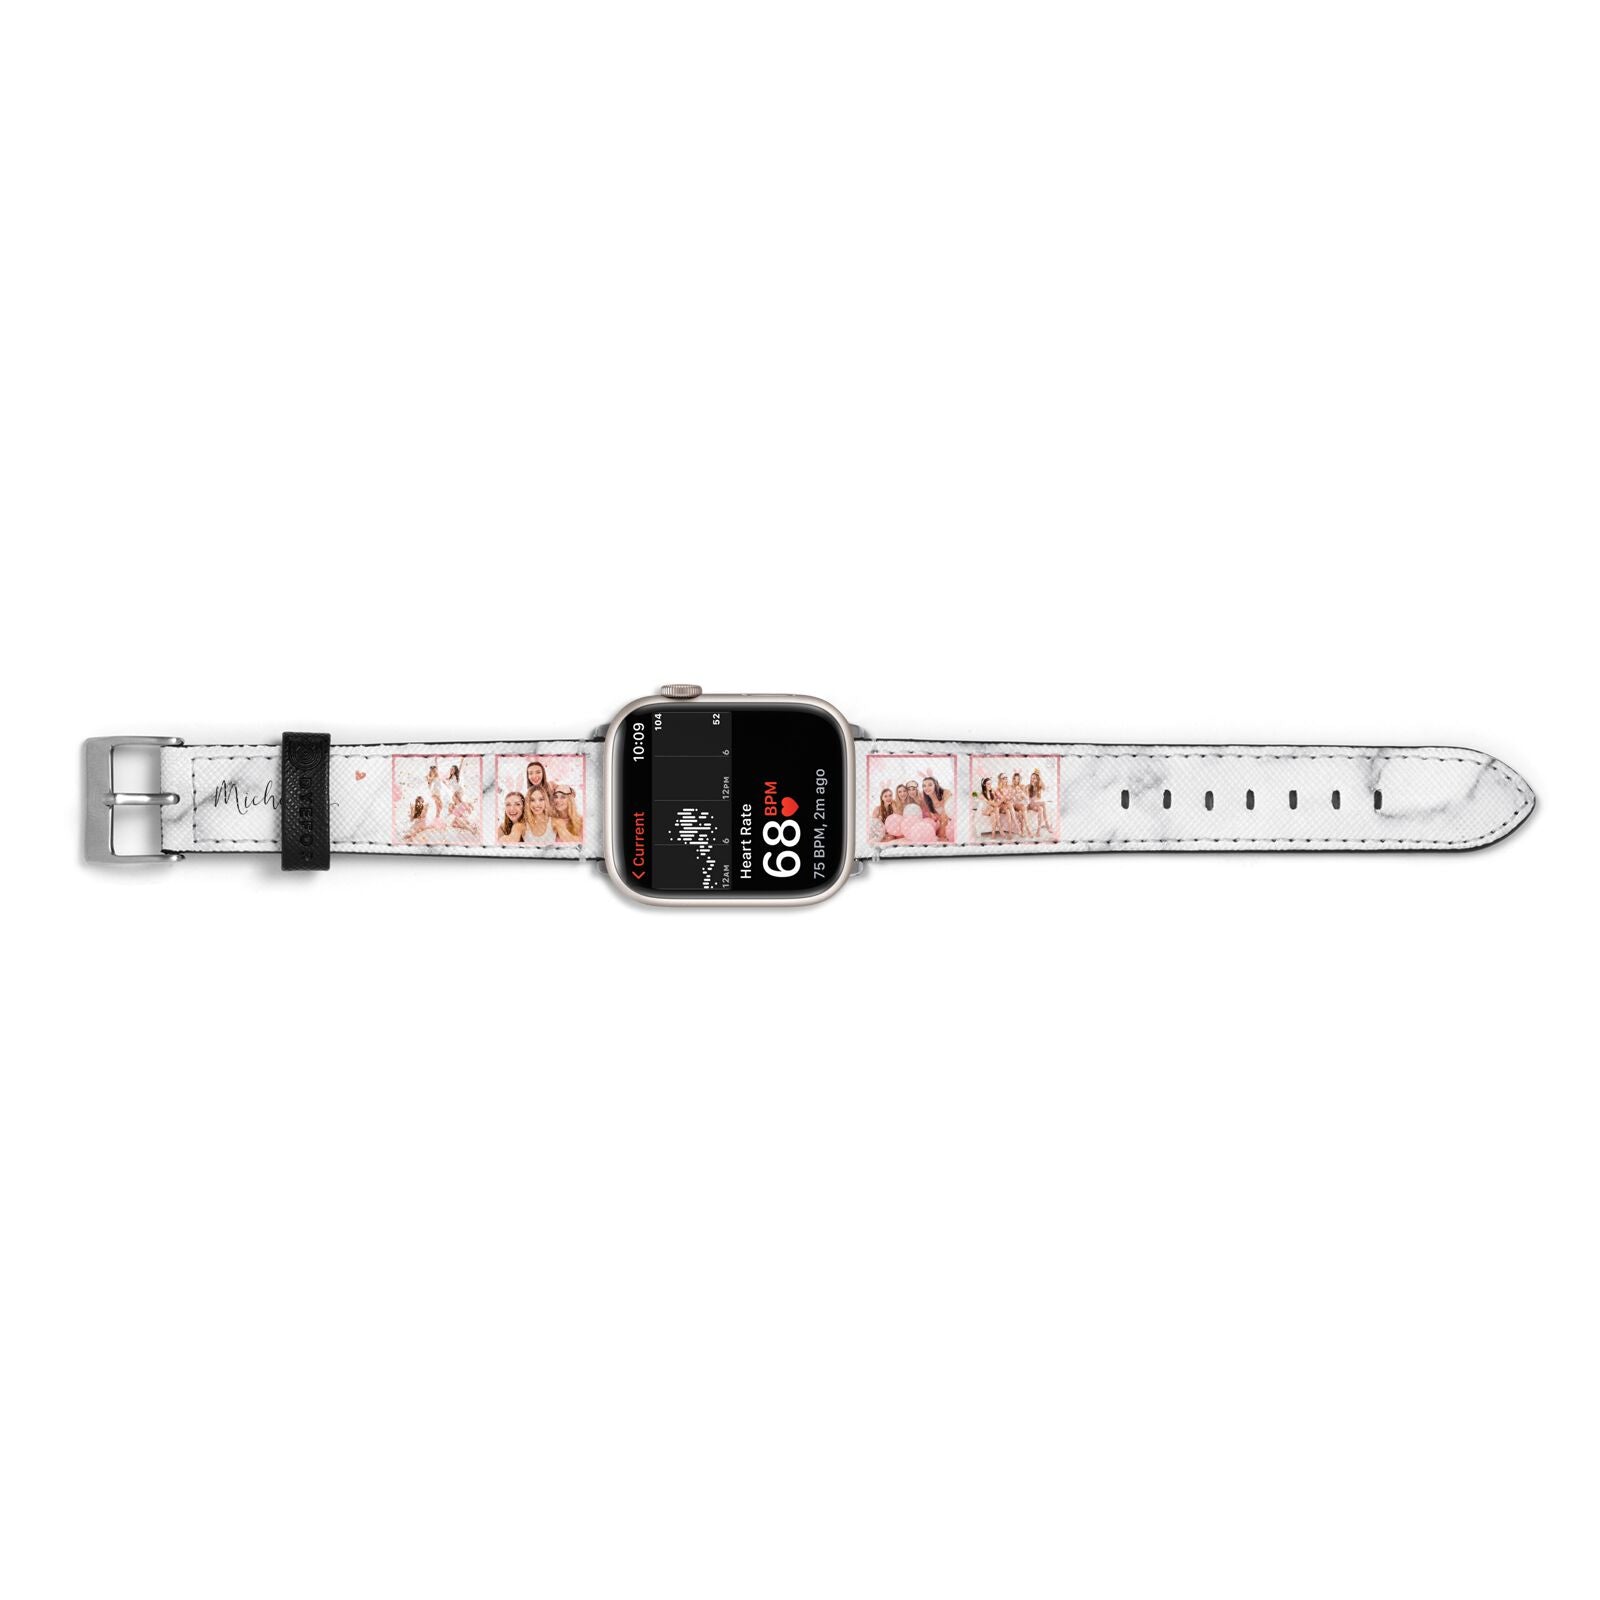 Marble Photo Strip Personalised Apple Watch Strap Size 38mm Landscape Image Silver Hardware